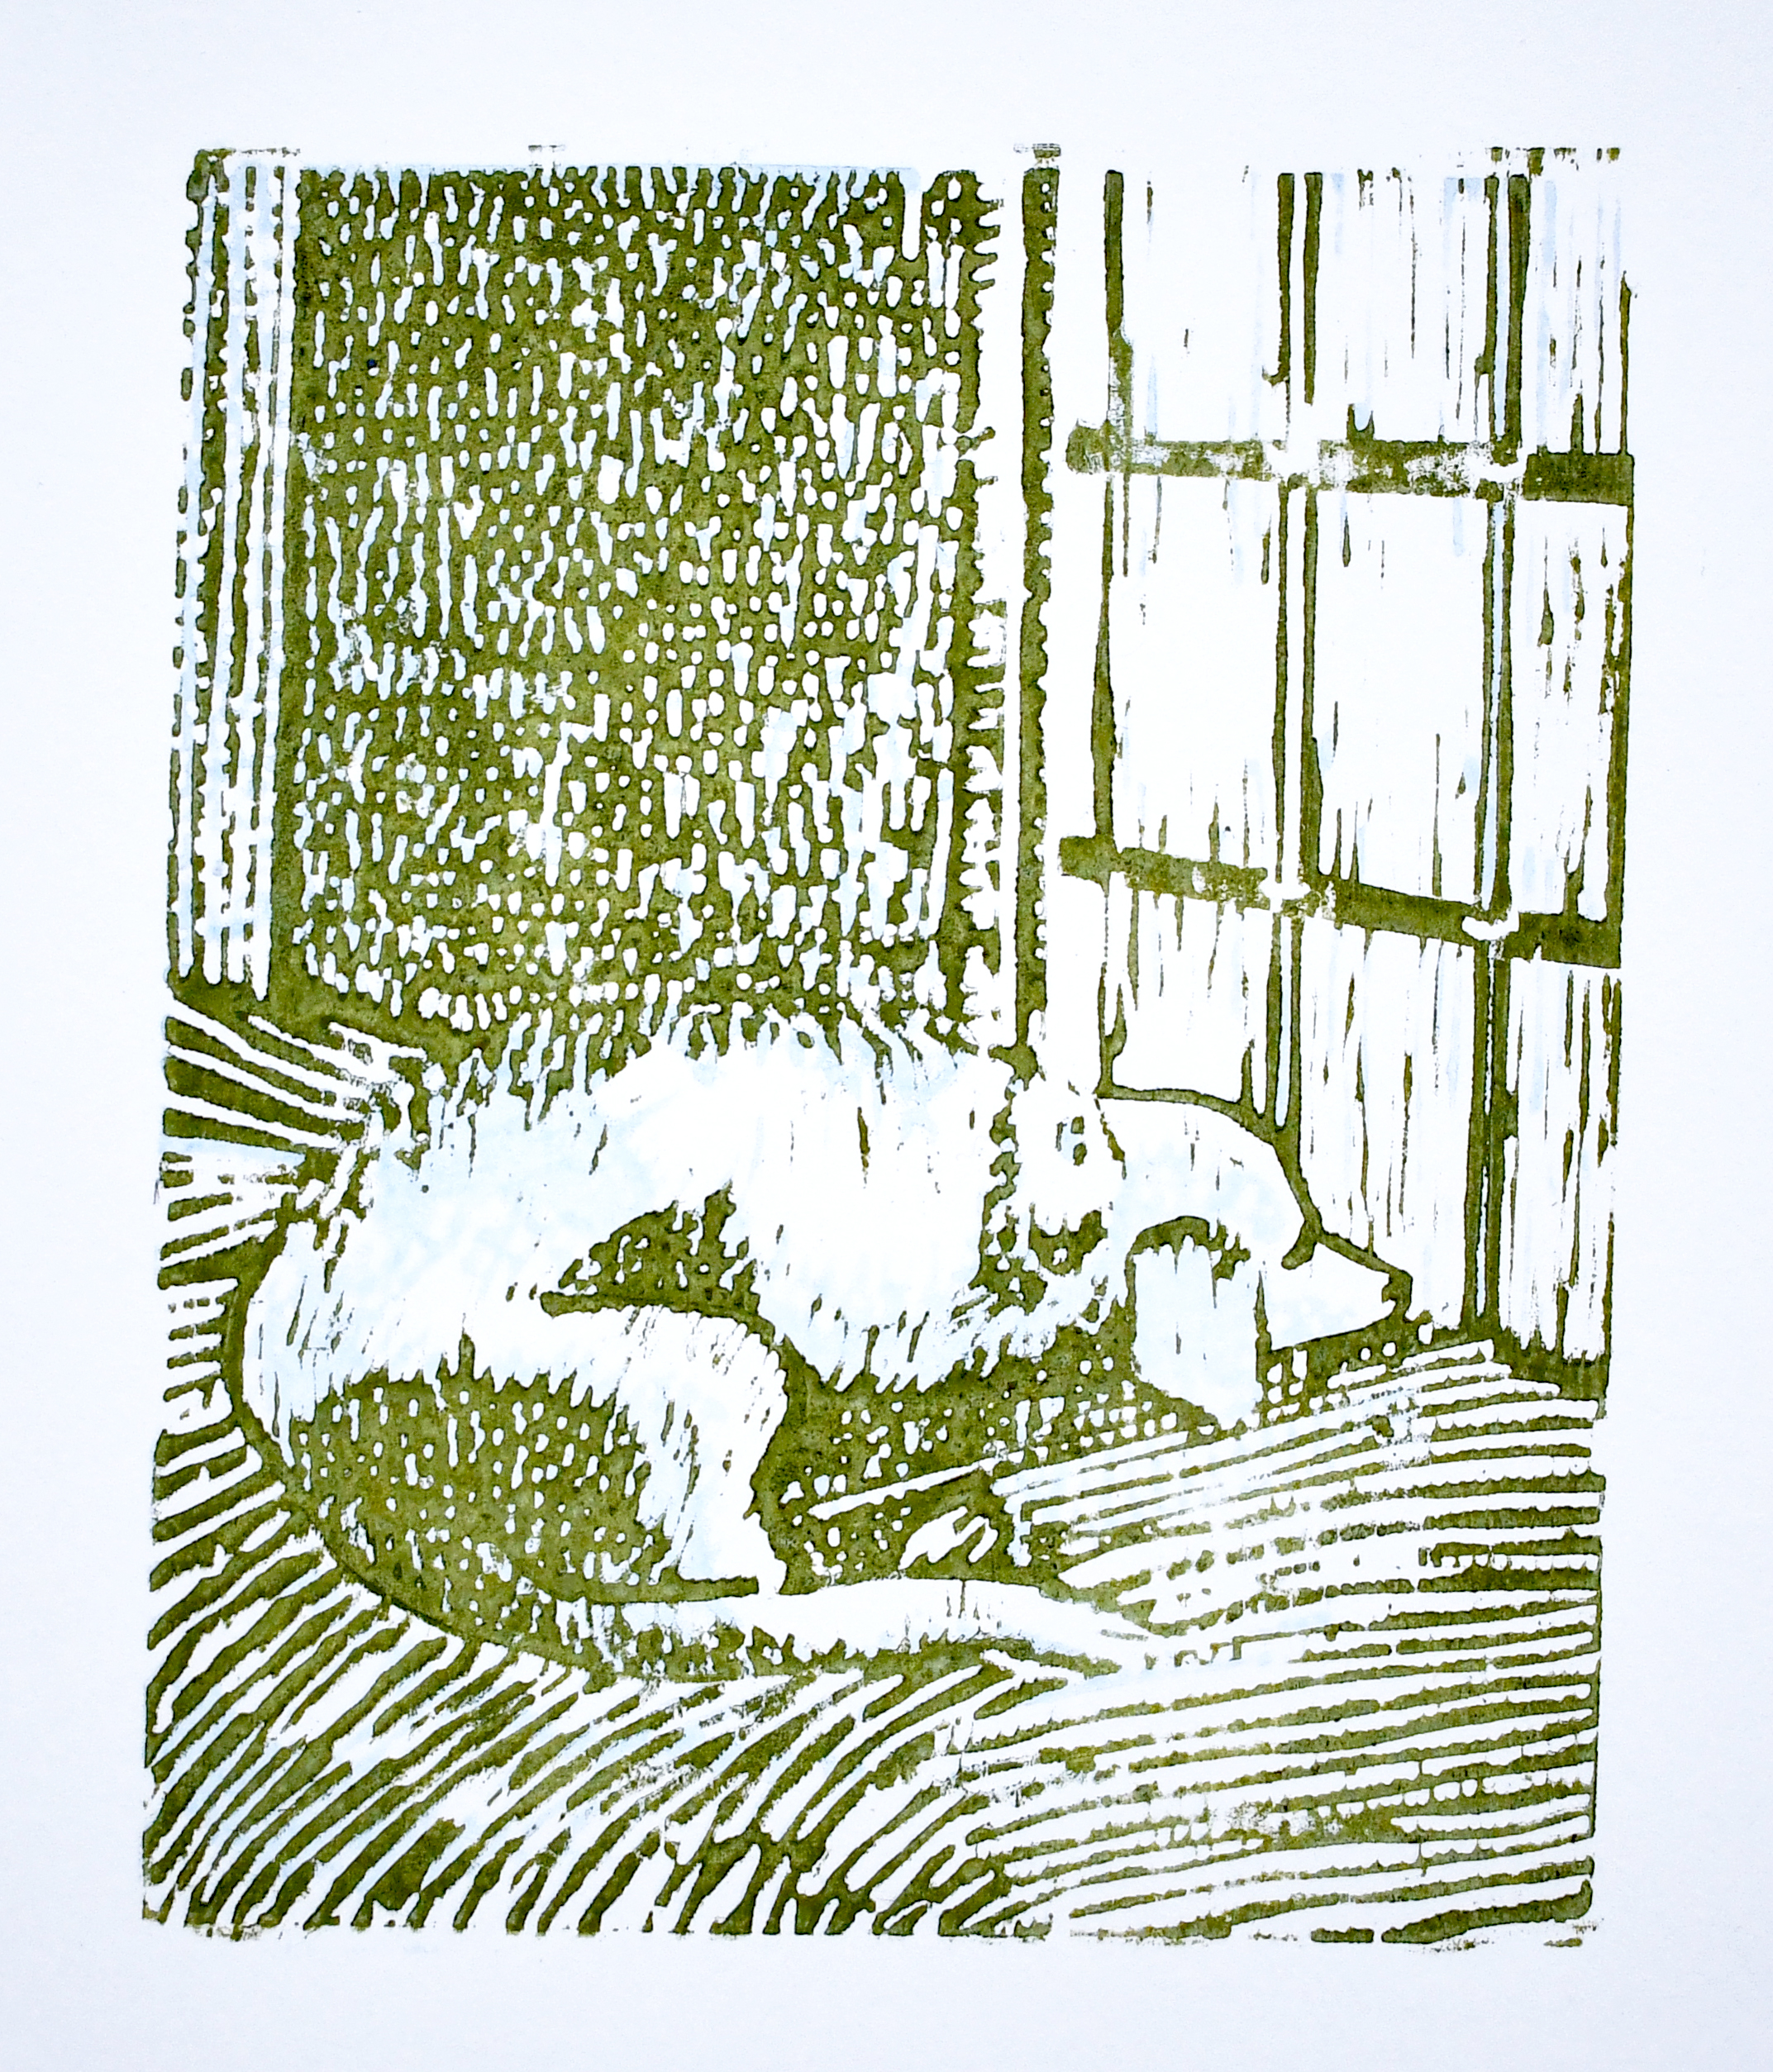 green and blue woodcut art print in a dog lying on a beg looking out the window